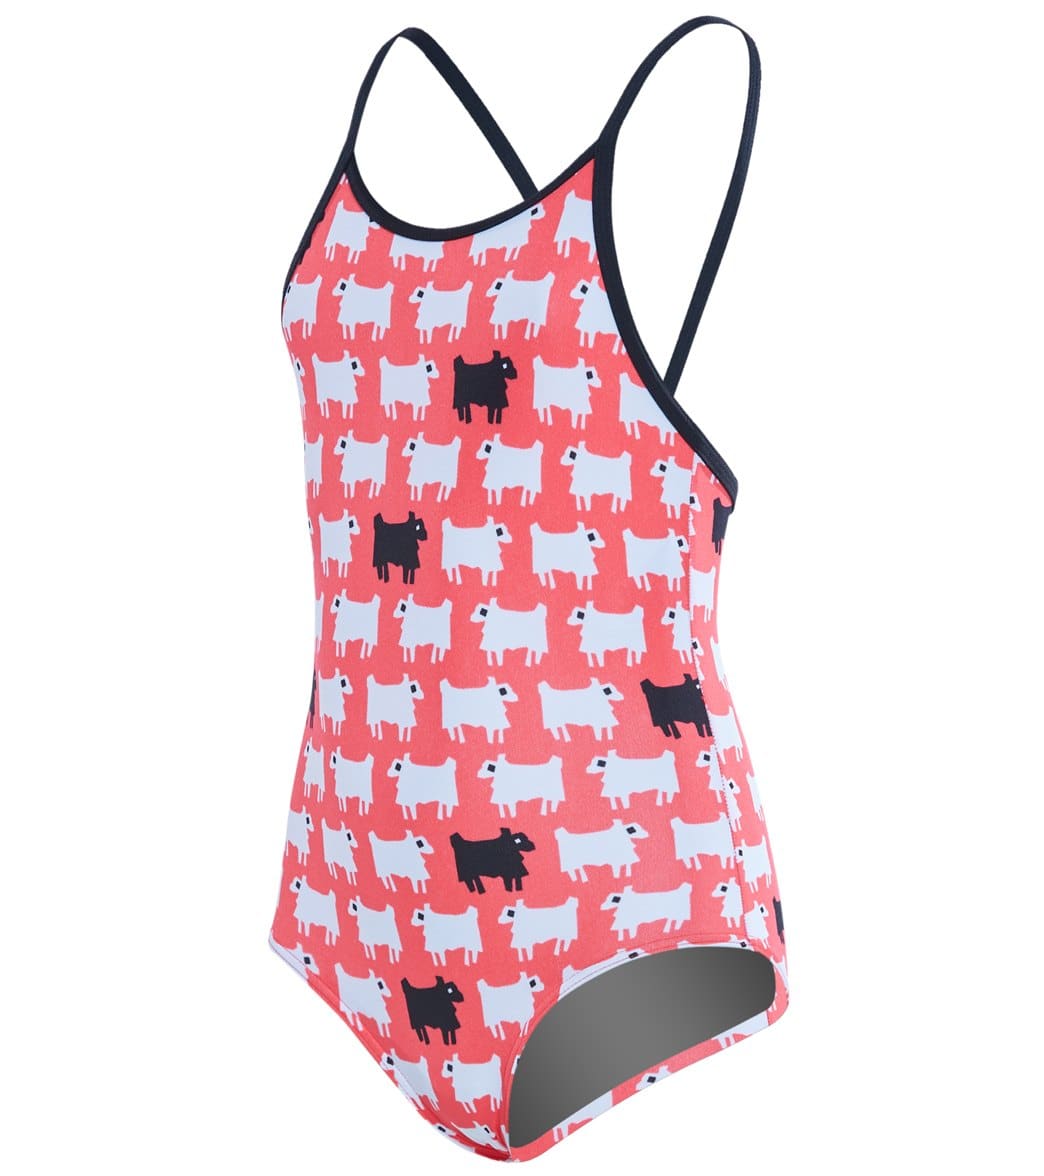 Funkita Toddler Girls' Black Sheep One Piece Swimsuit - Black/Red/White 1T Polyester - Swimoutlet.com